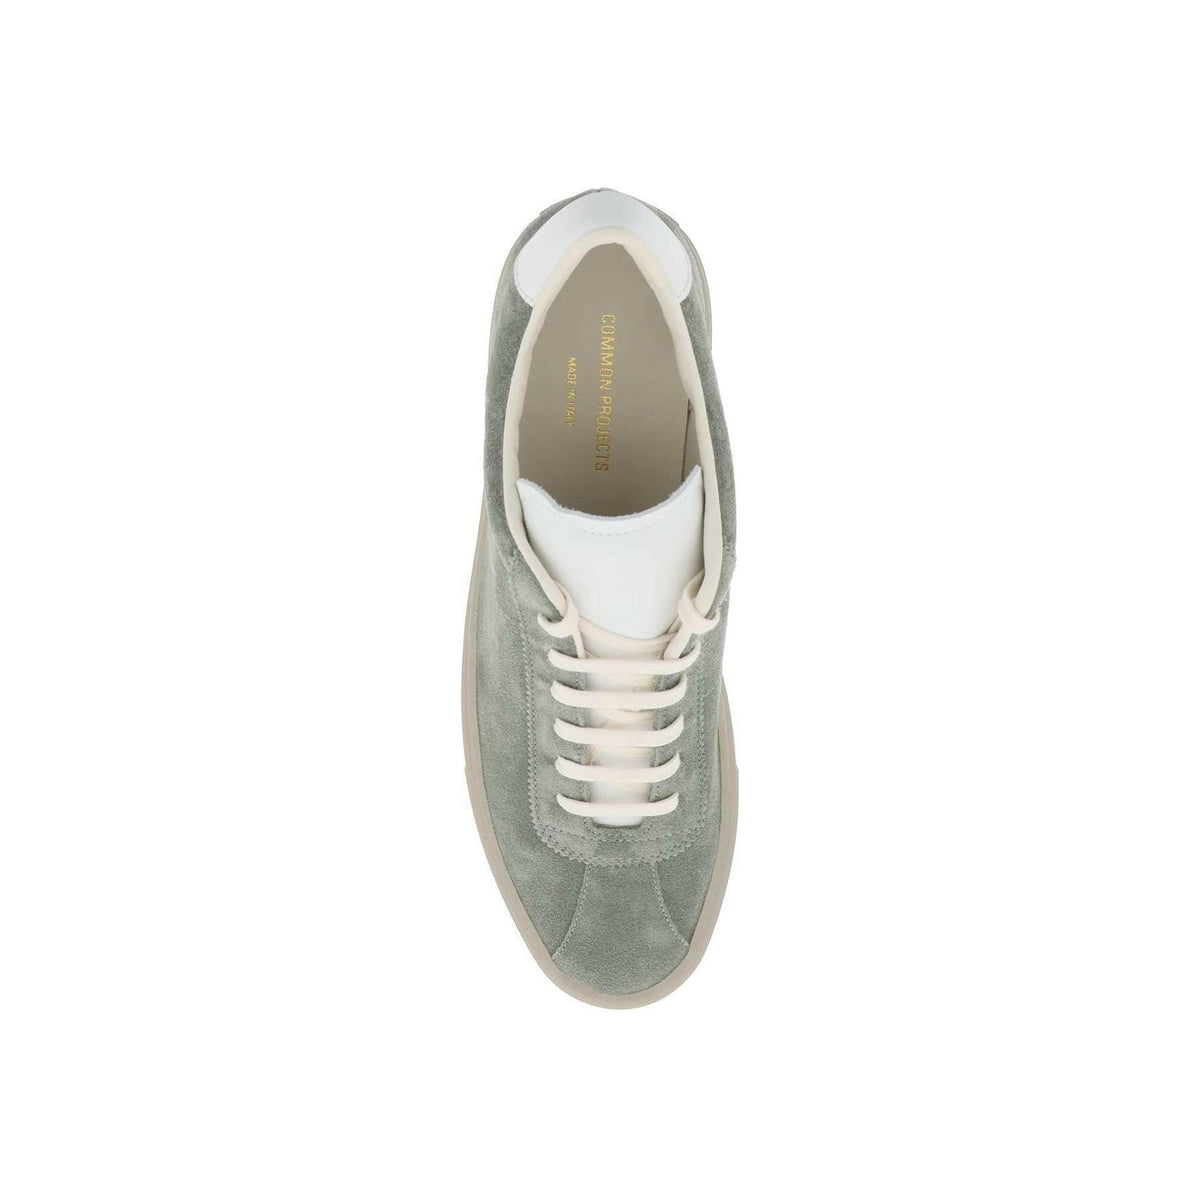 Sage Green 70's Tennis Suede Sneakers COMMON PROJECTS JOHN JULIA.